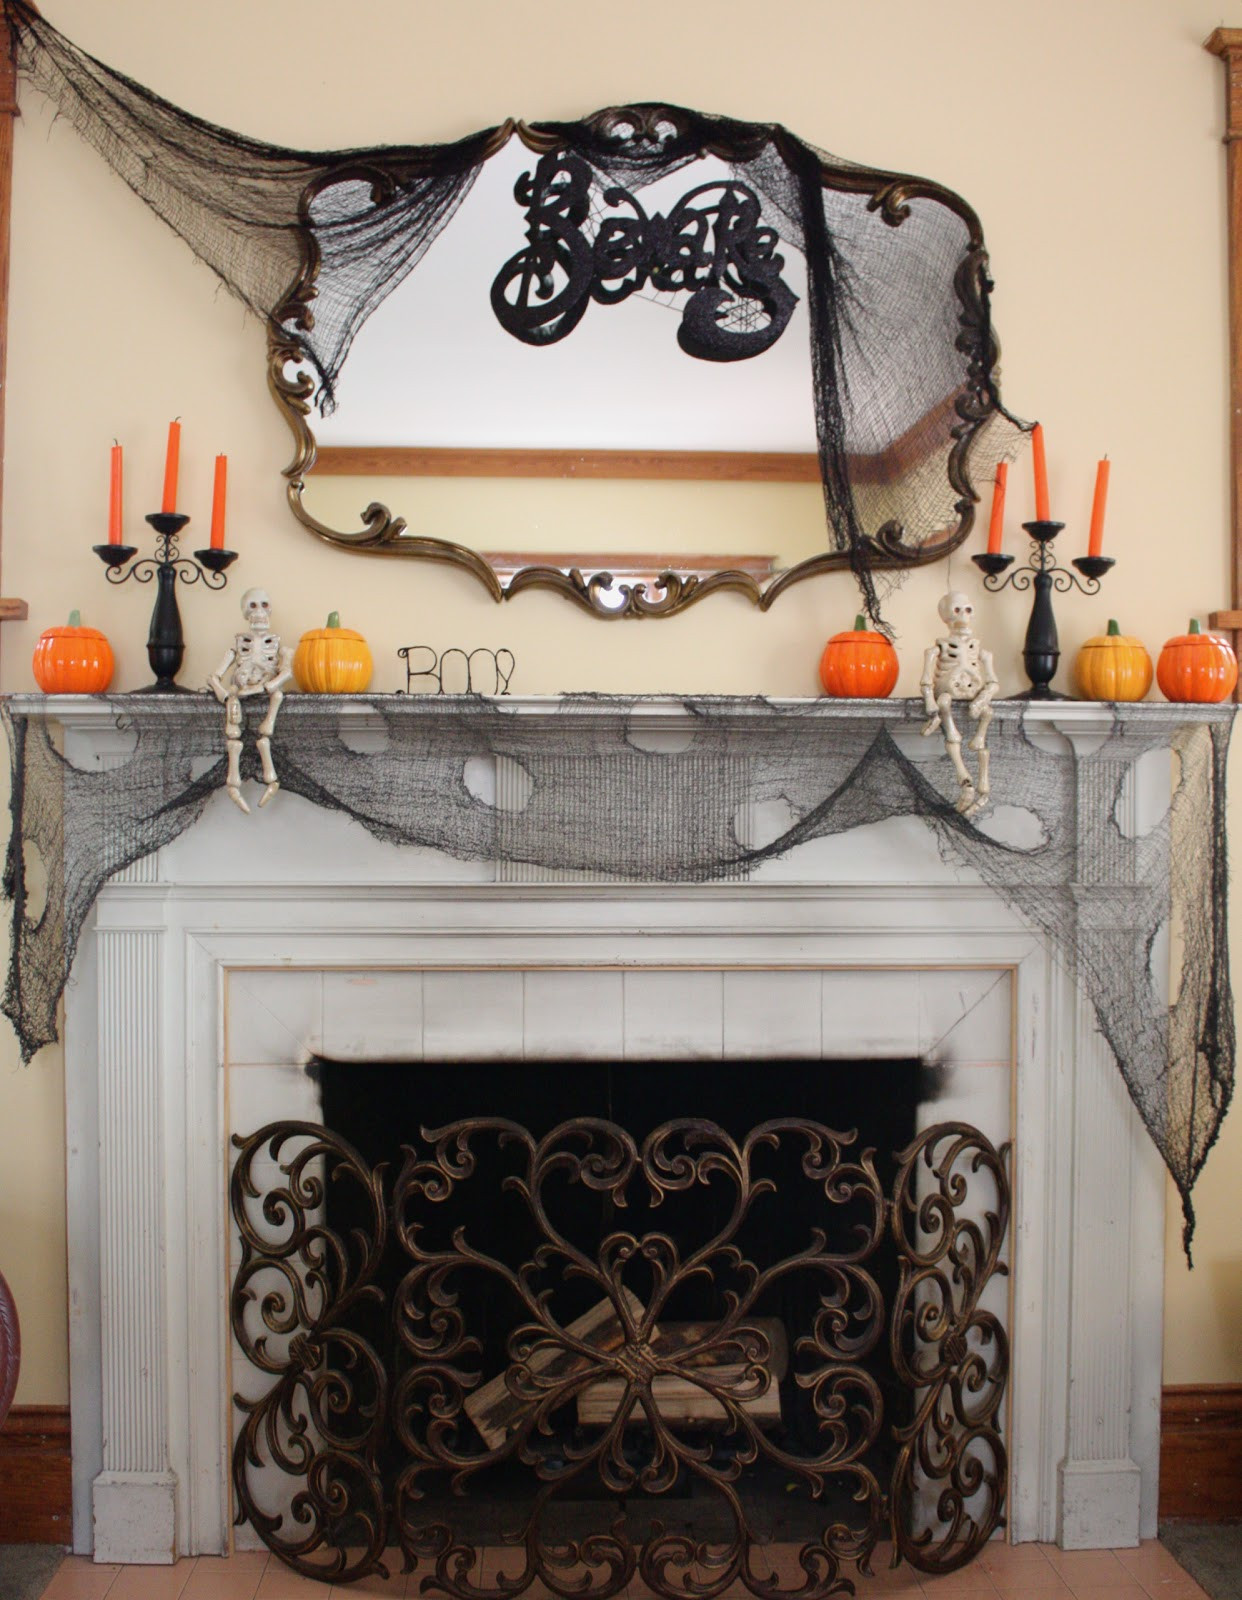 Halloween Fireplace Decorations
 At Second Street Halloween mantel and other decorations